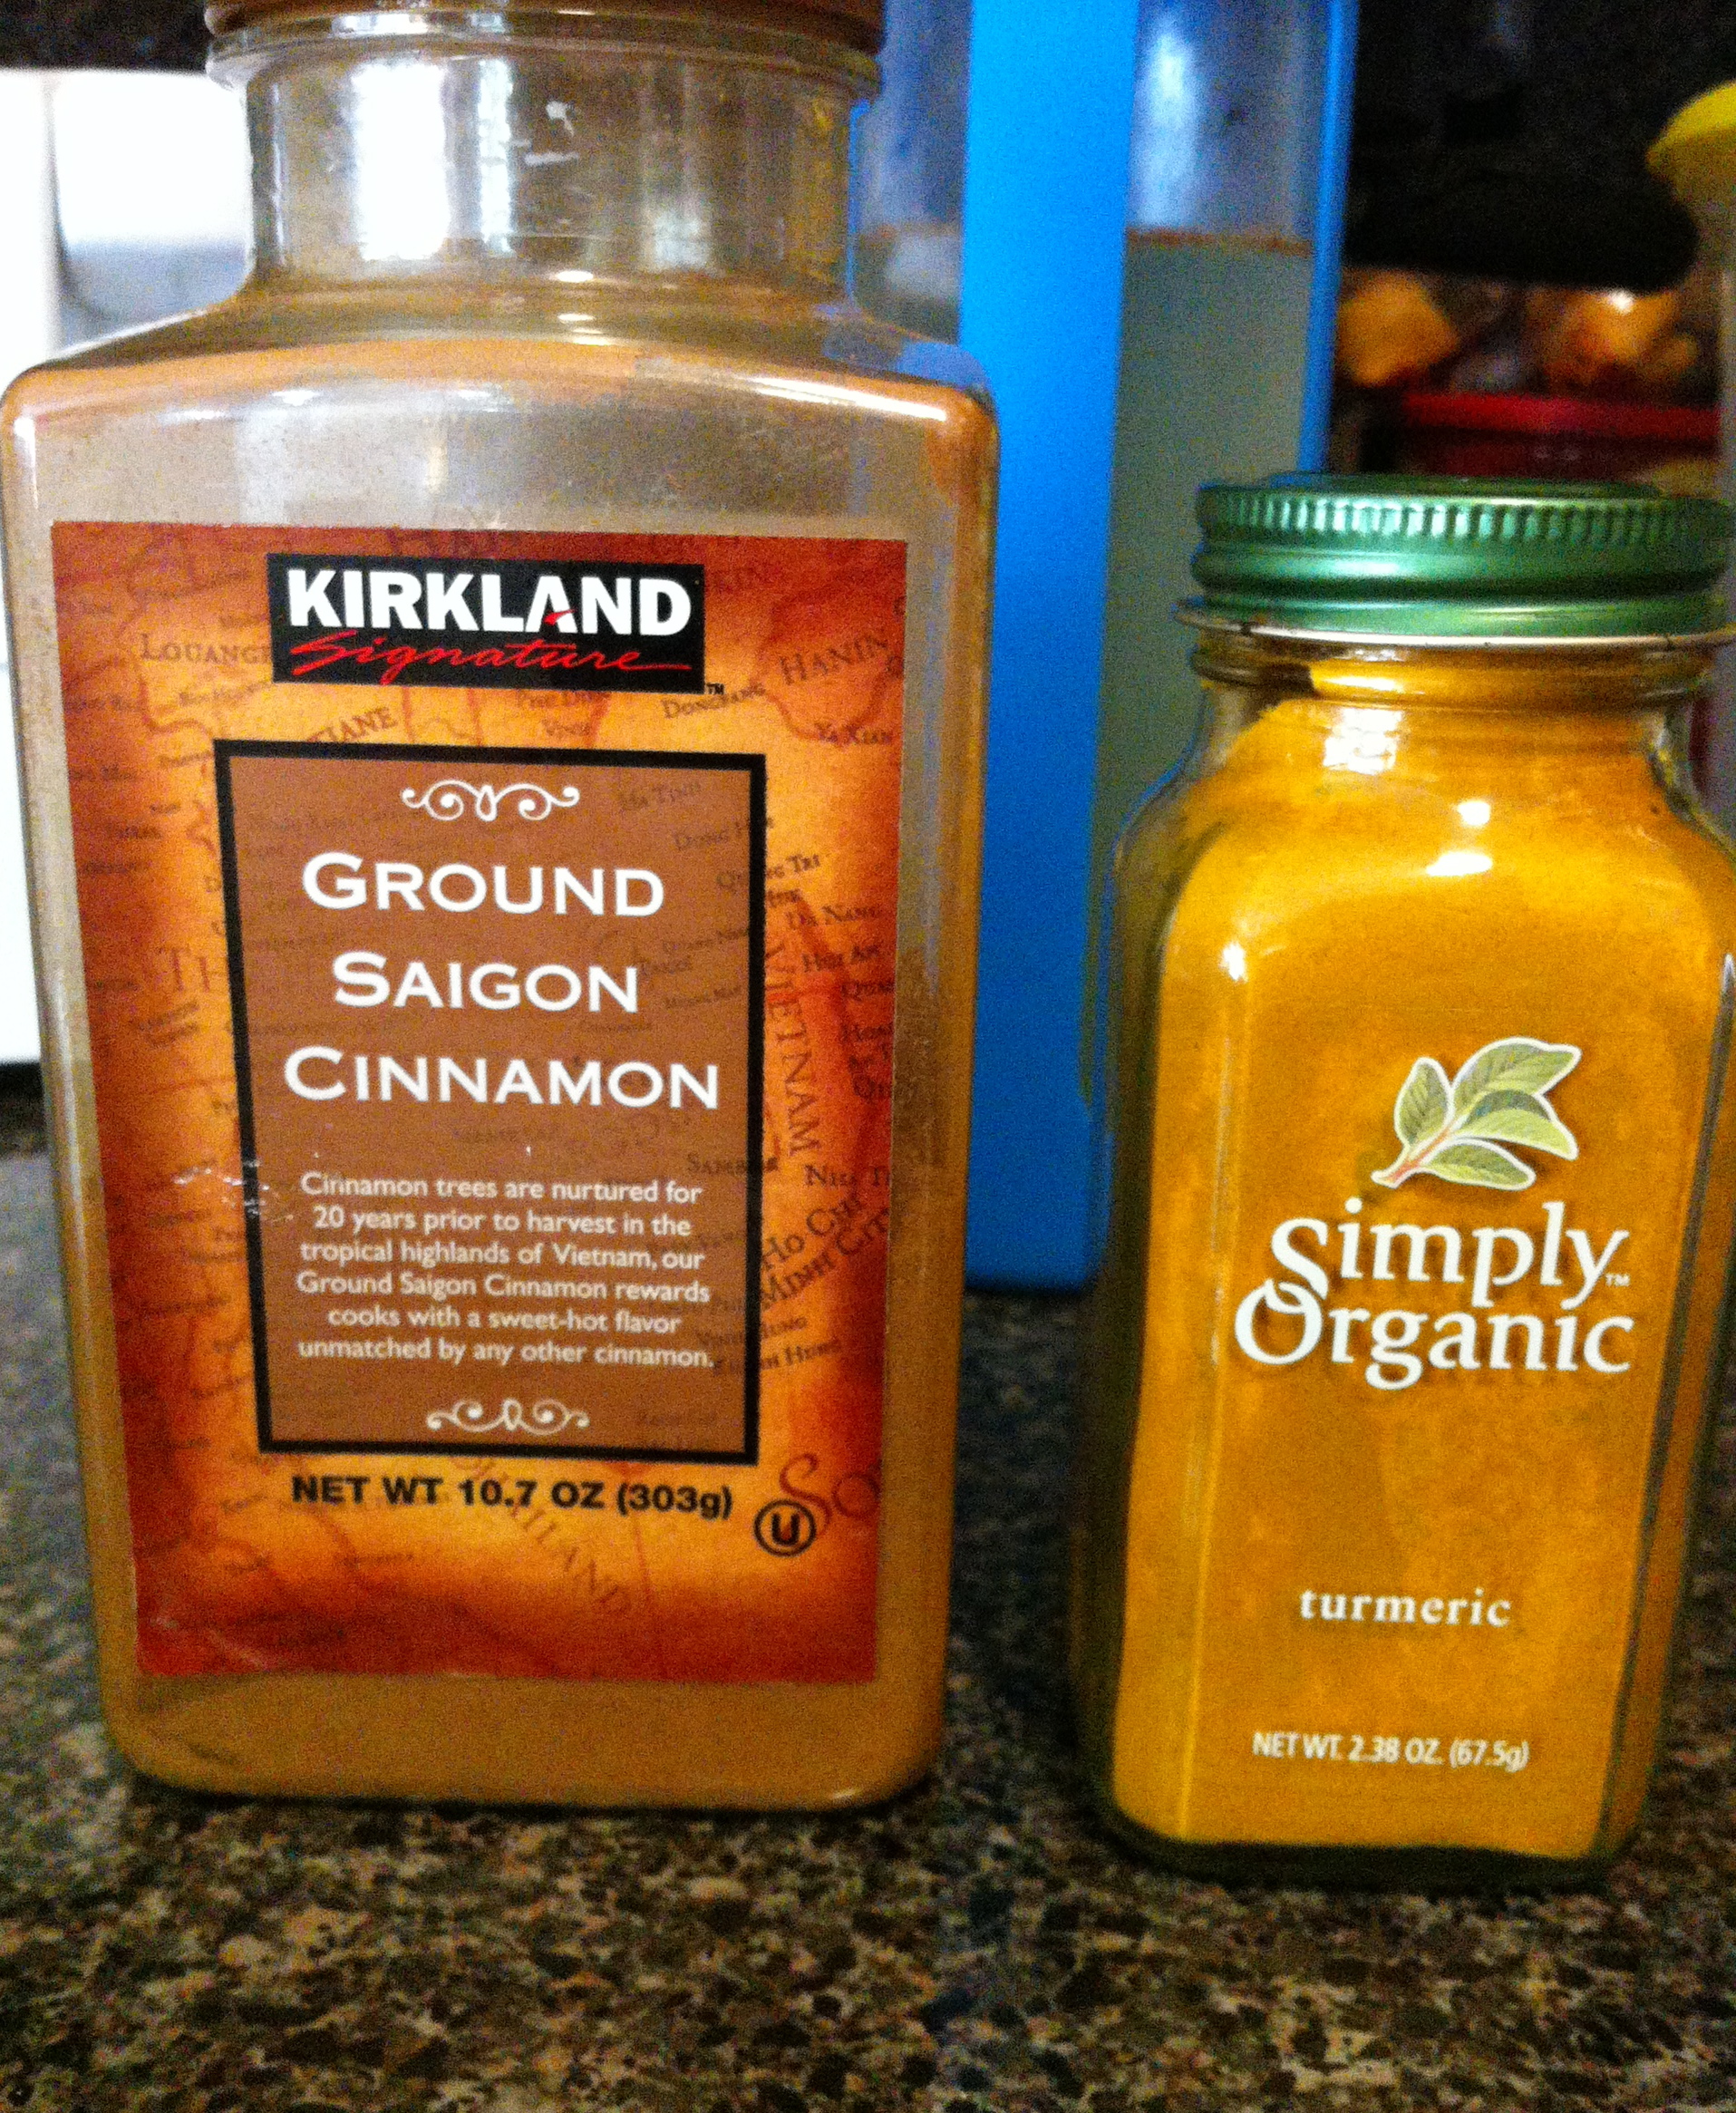 Don't even get me started on how awesome turmeric is.